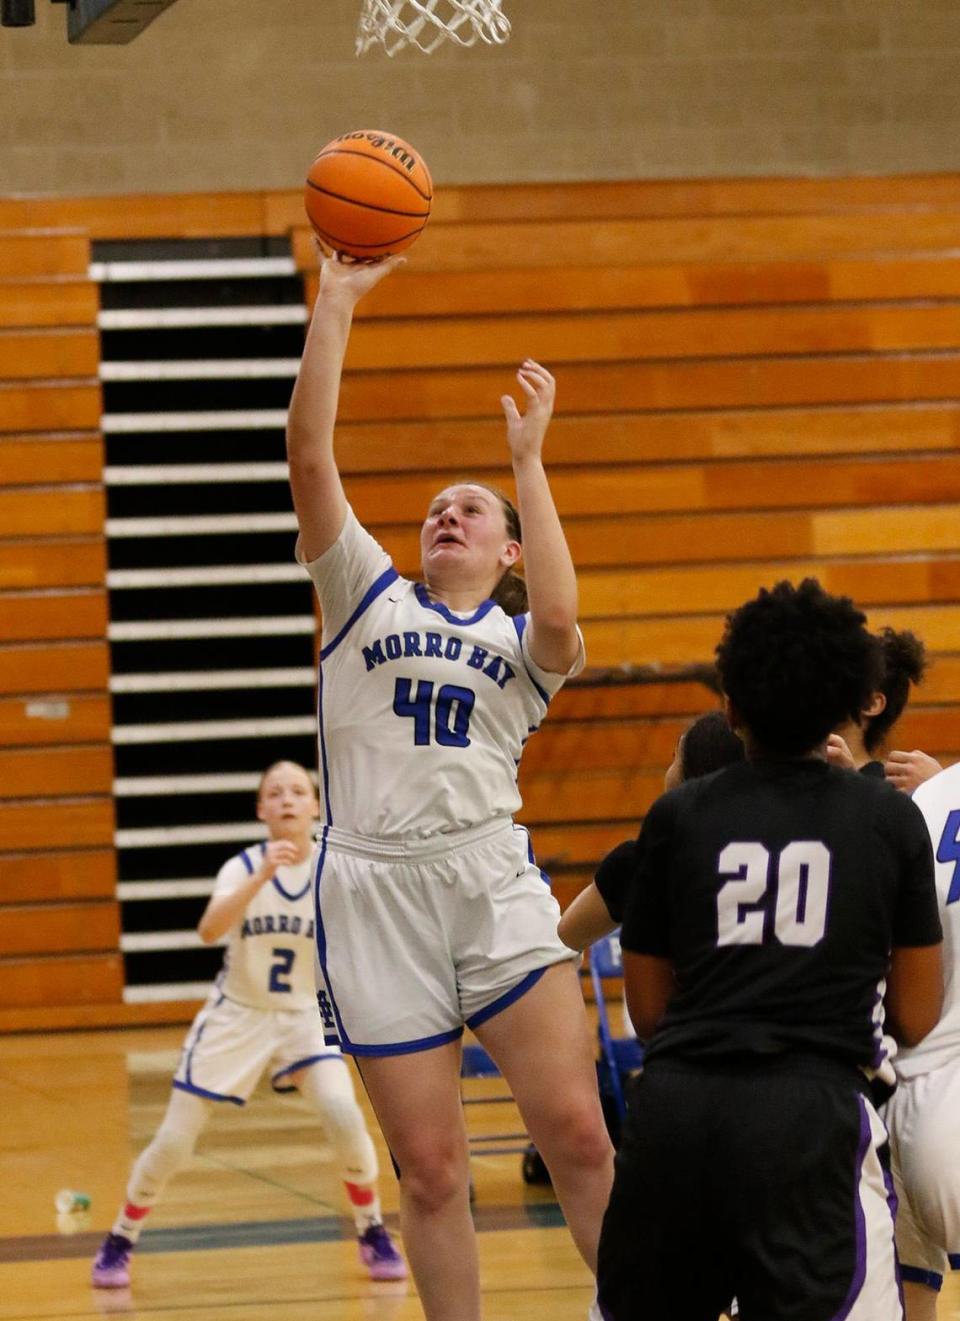 Morro Bay High School girls basketball team beats Rancho Cucamunga 49-29 in the CIF state playoffs at Morro Bay High School, Tuesday, Feb. 27, 2024. Tailer Morrison makes one of the many baskets in this game. Rancho Cucamunga Zara Ahaiwe (20) watches.